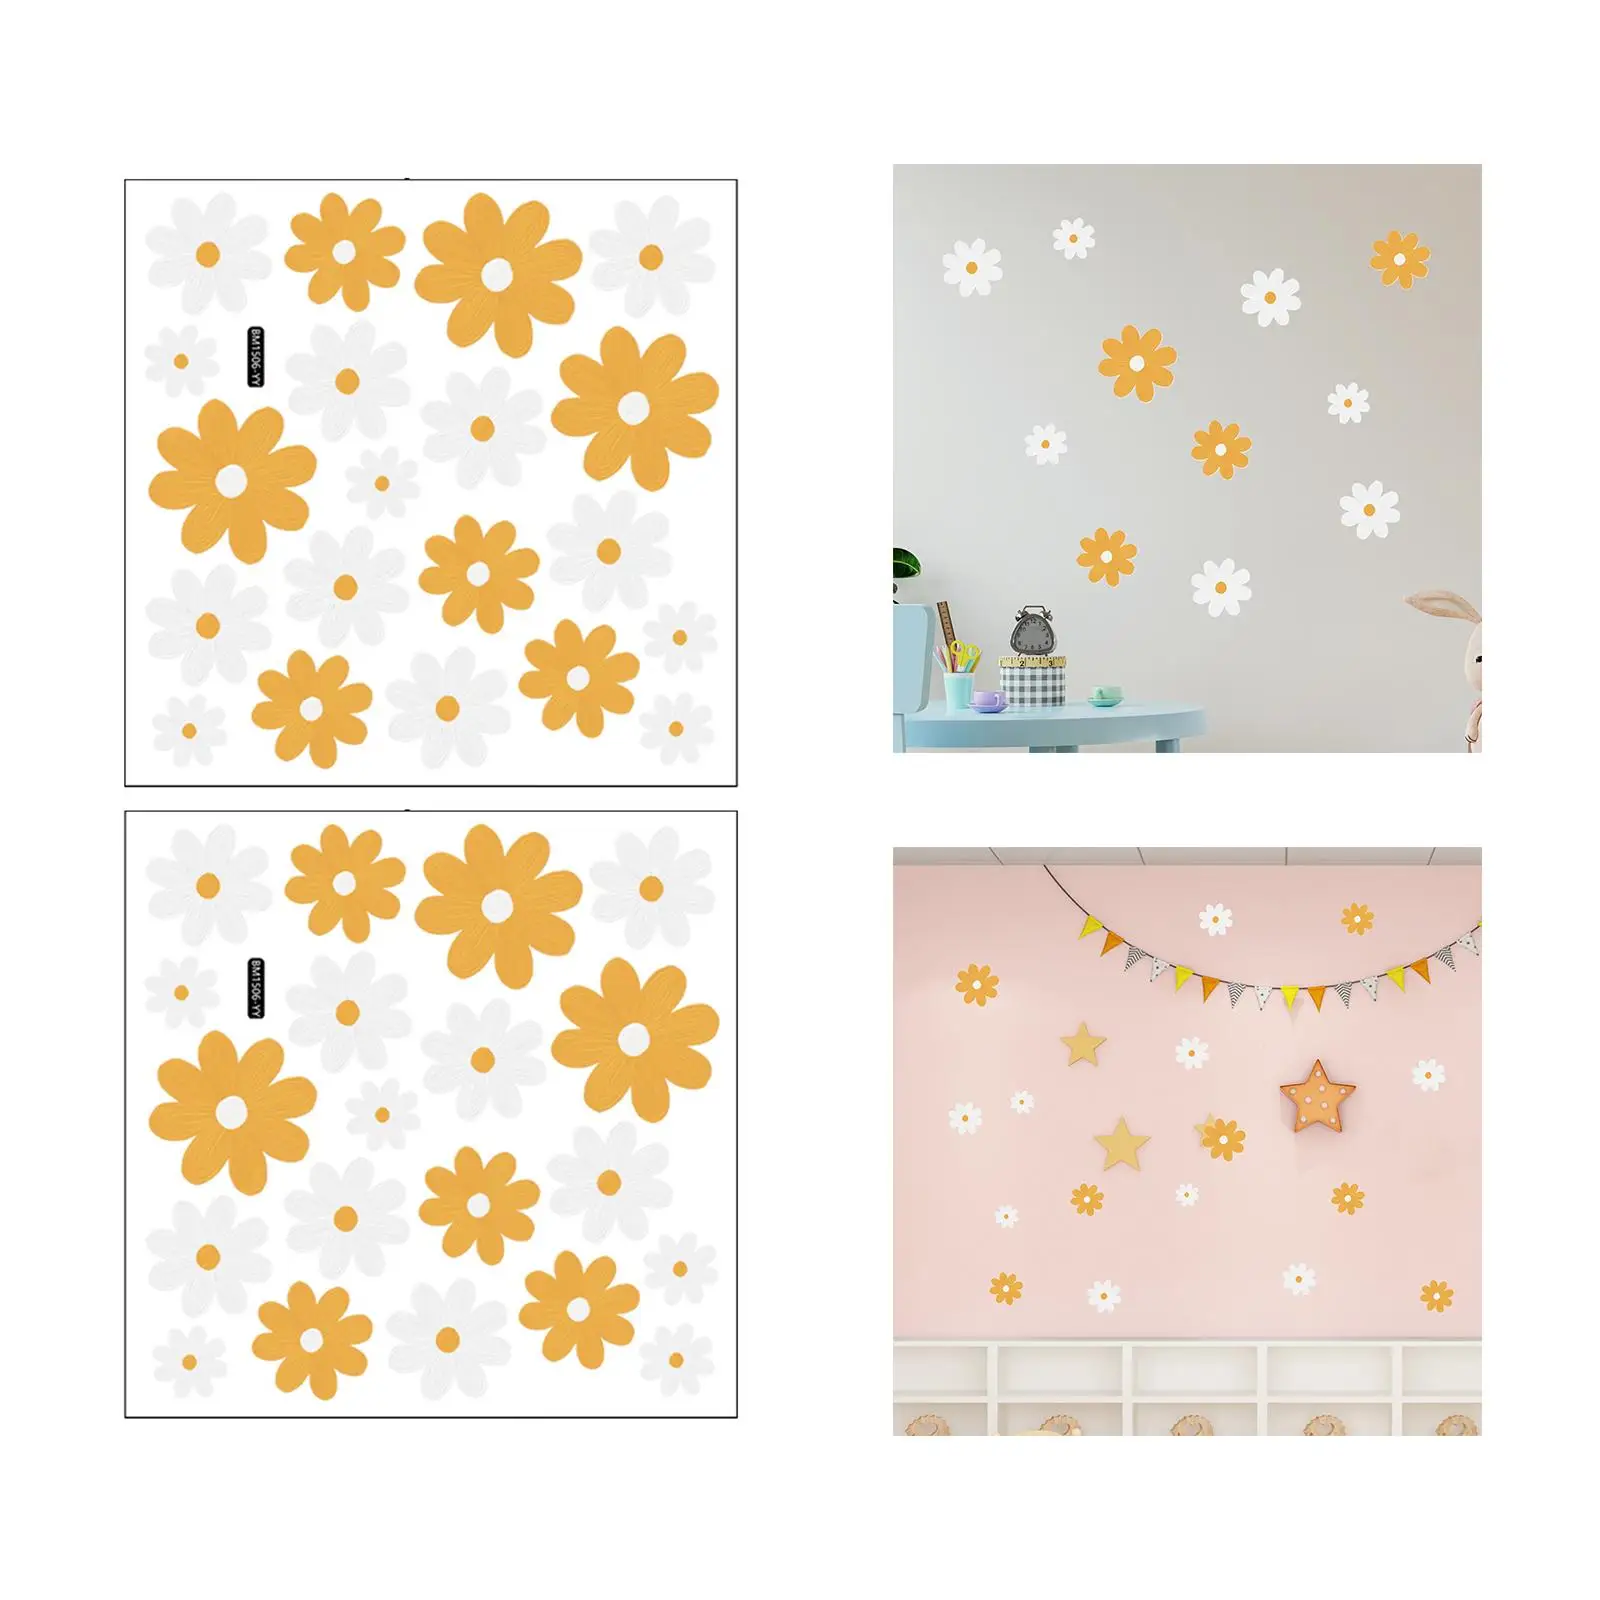 Daisy Floral Wall Stickers Decorative Vinyl Mural Floral Wall Decals for Kids Nursery Playroom Classroom Girls Bedroom Decor